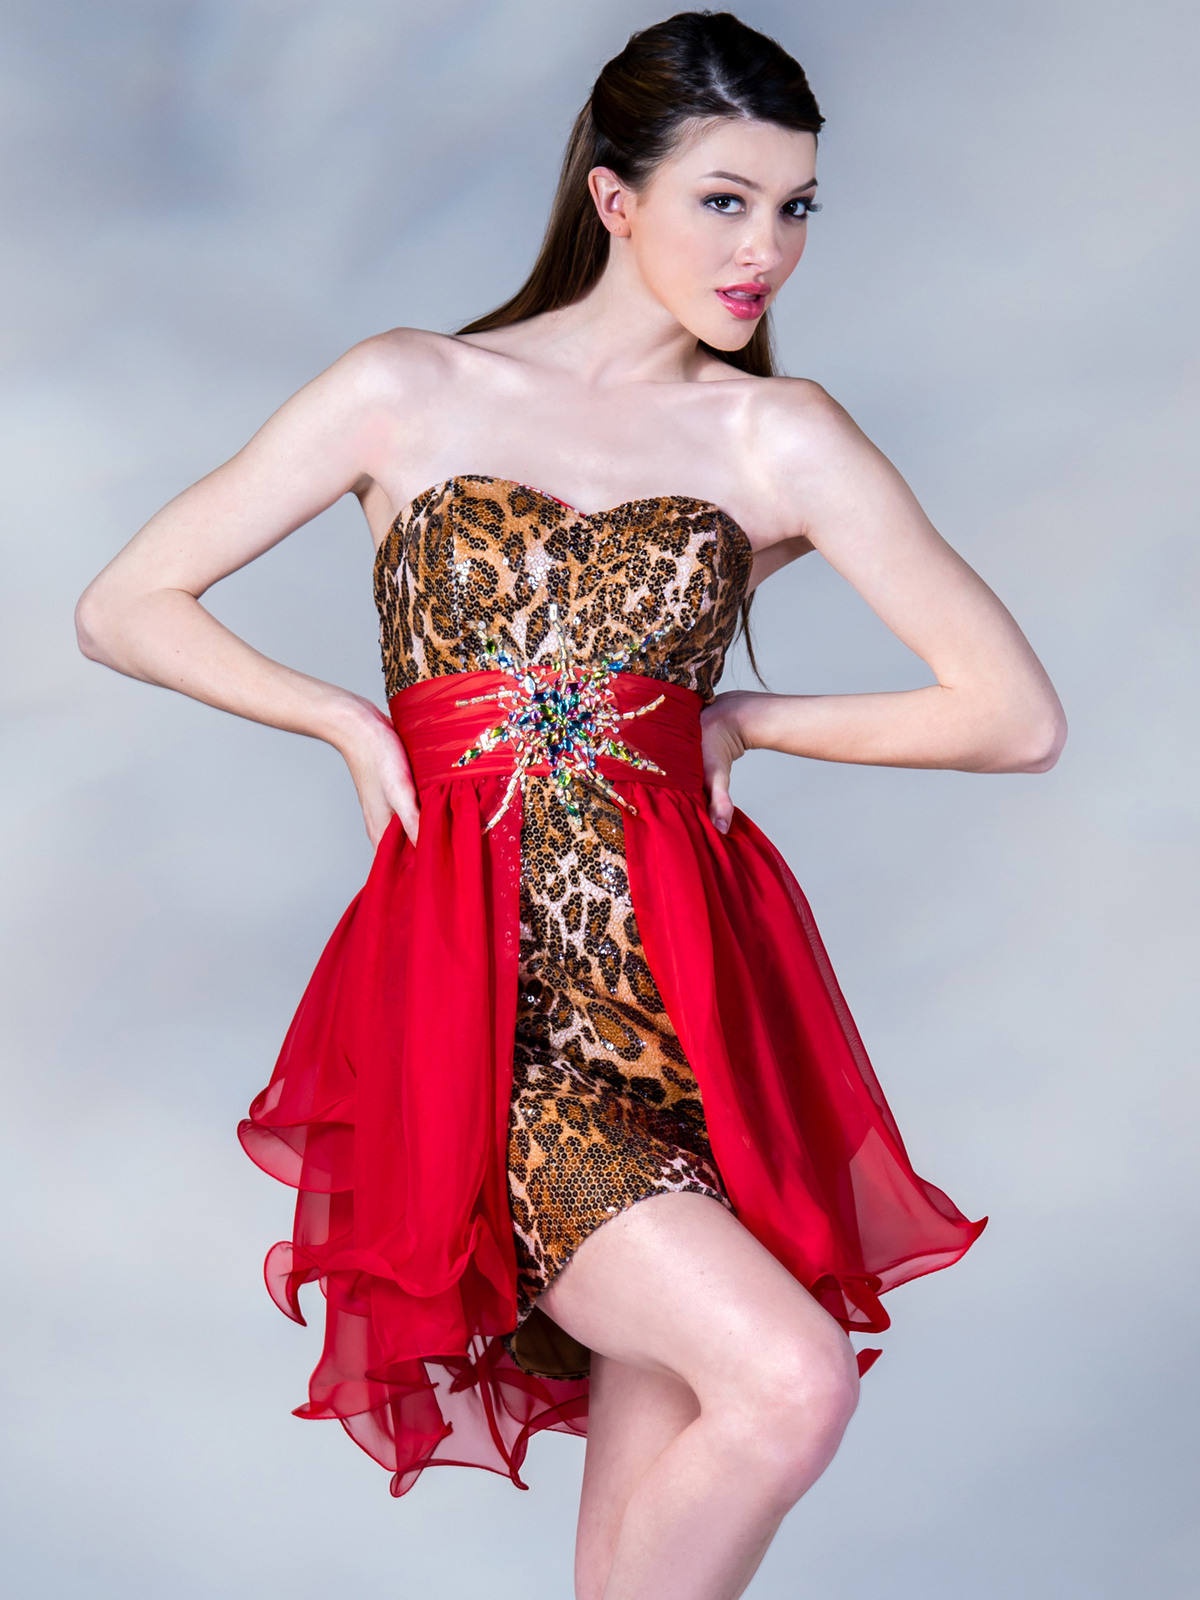 Leopard Print and Red Overlay Short Prom Dress - Sung Boutique L.A.